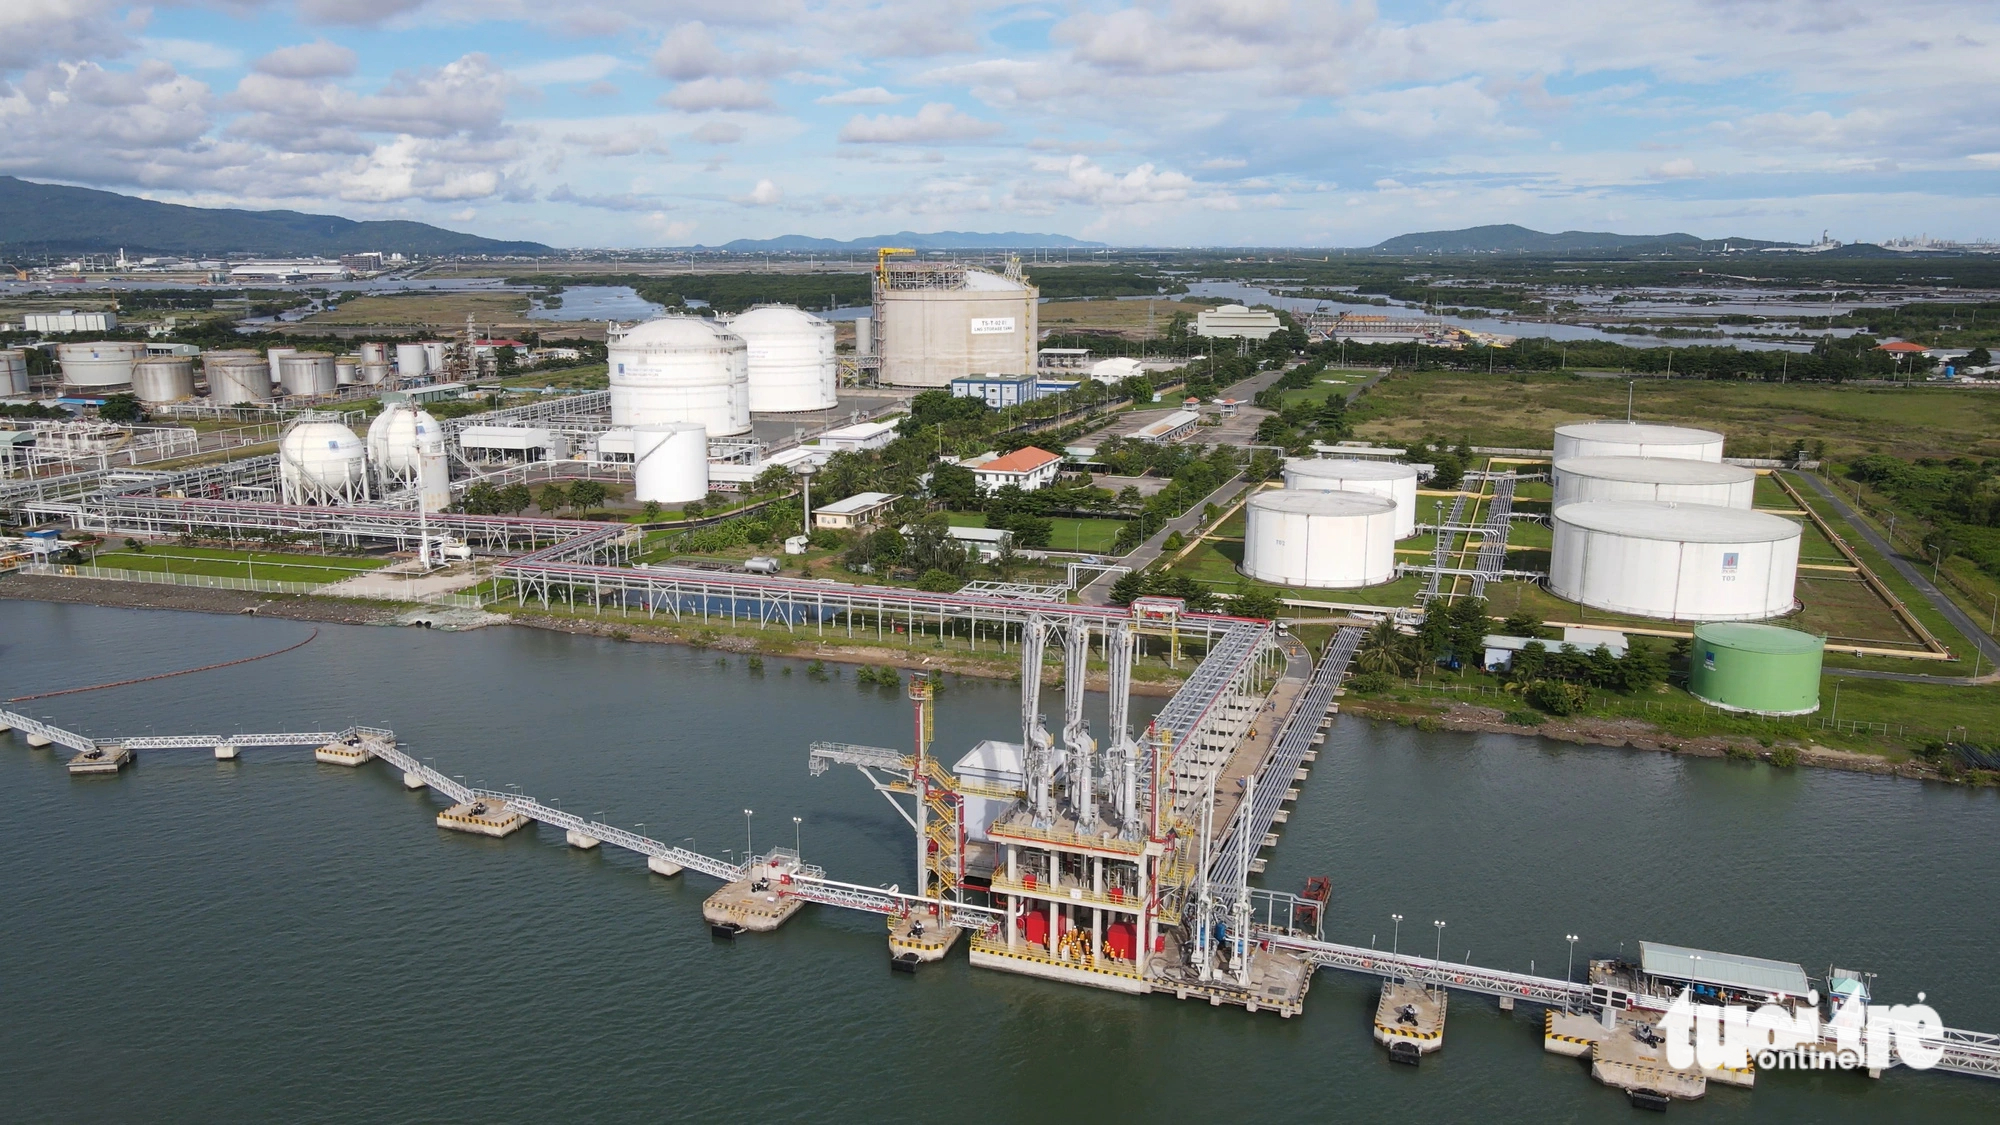 The LNG storage tank along with other liquefied petroleum gas storage tanks and the system of port and gas pipelines at Thi Vai International Port in Ba Ria - Vung Tau Province, southern Vietnam. Photo: Dong Ha / Tuoi Tre